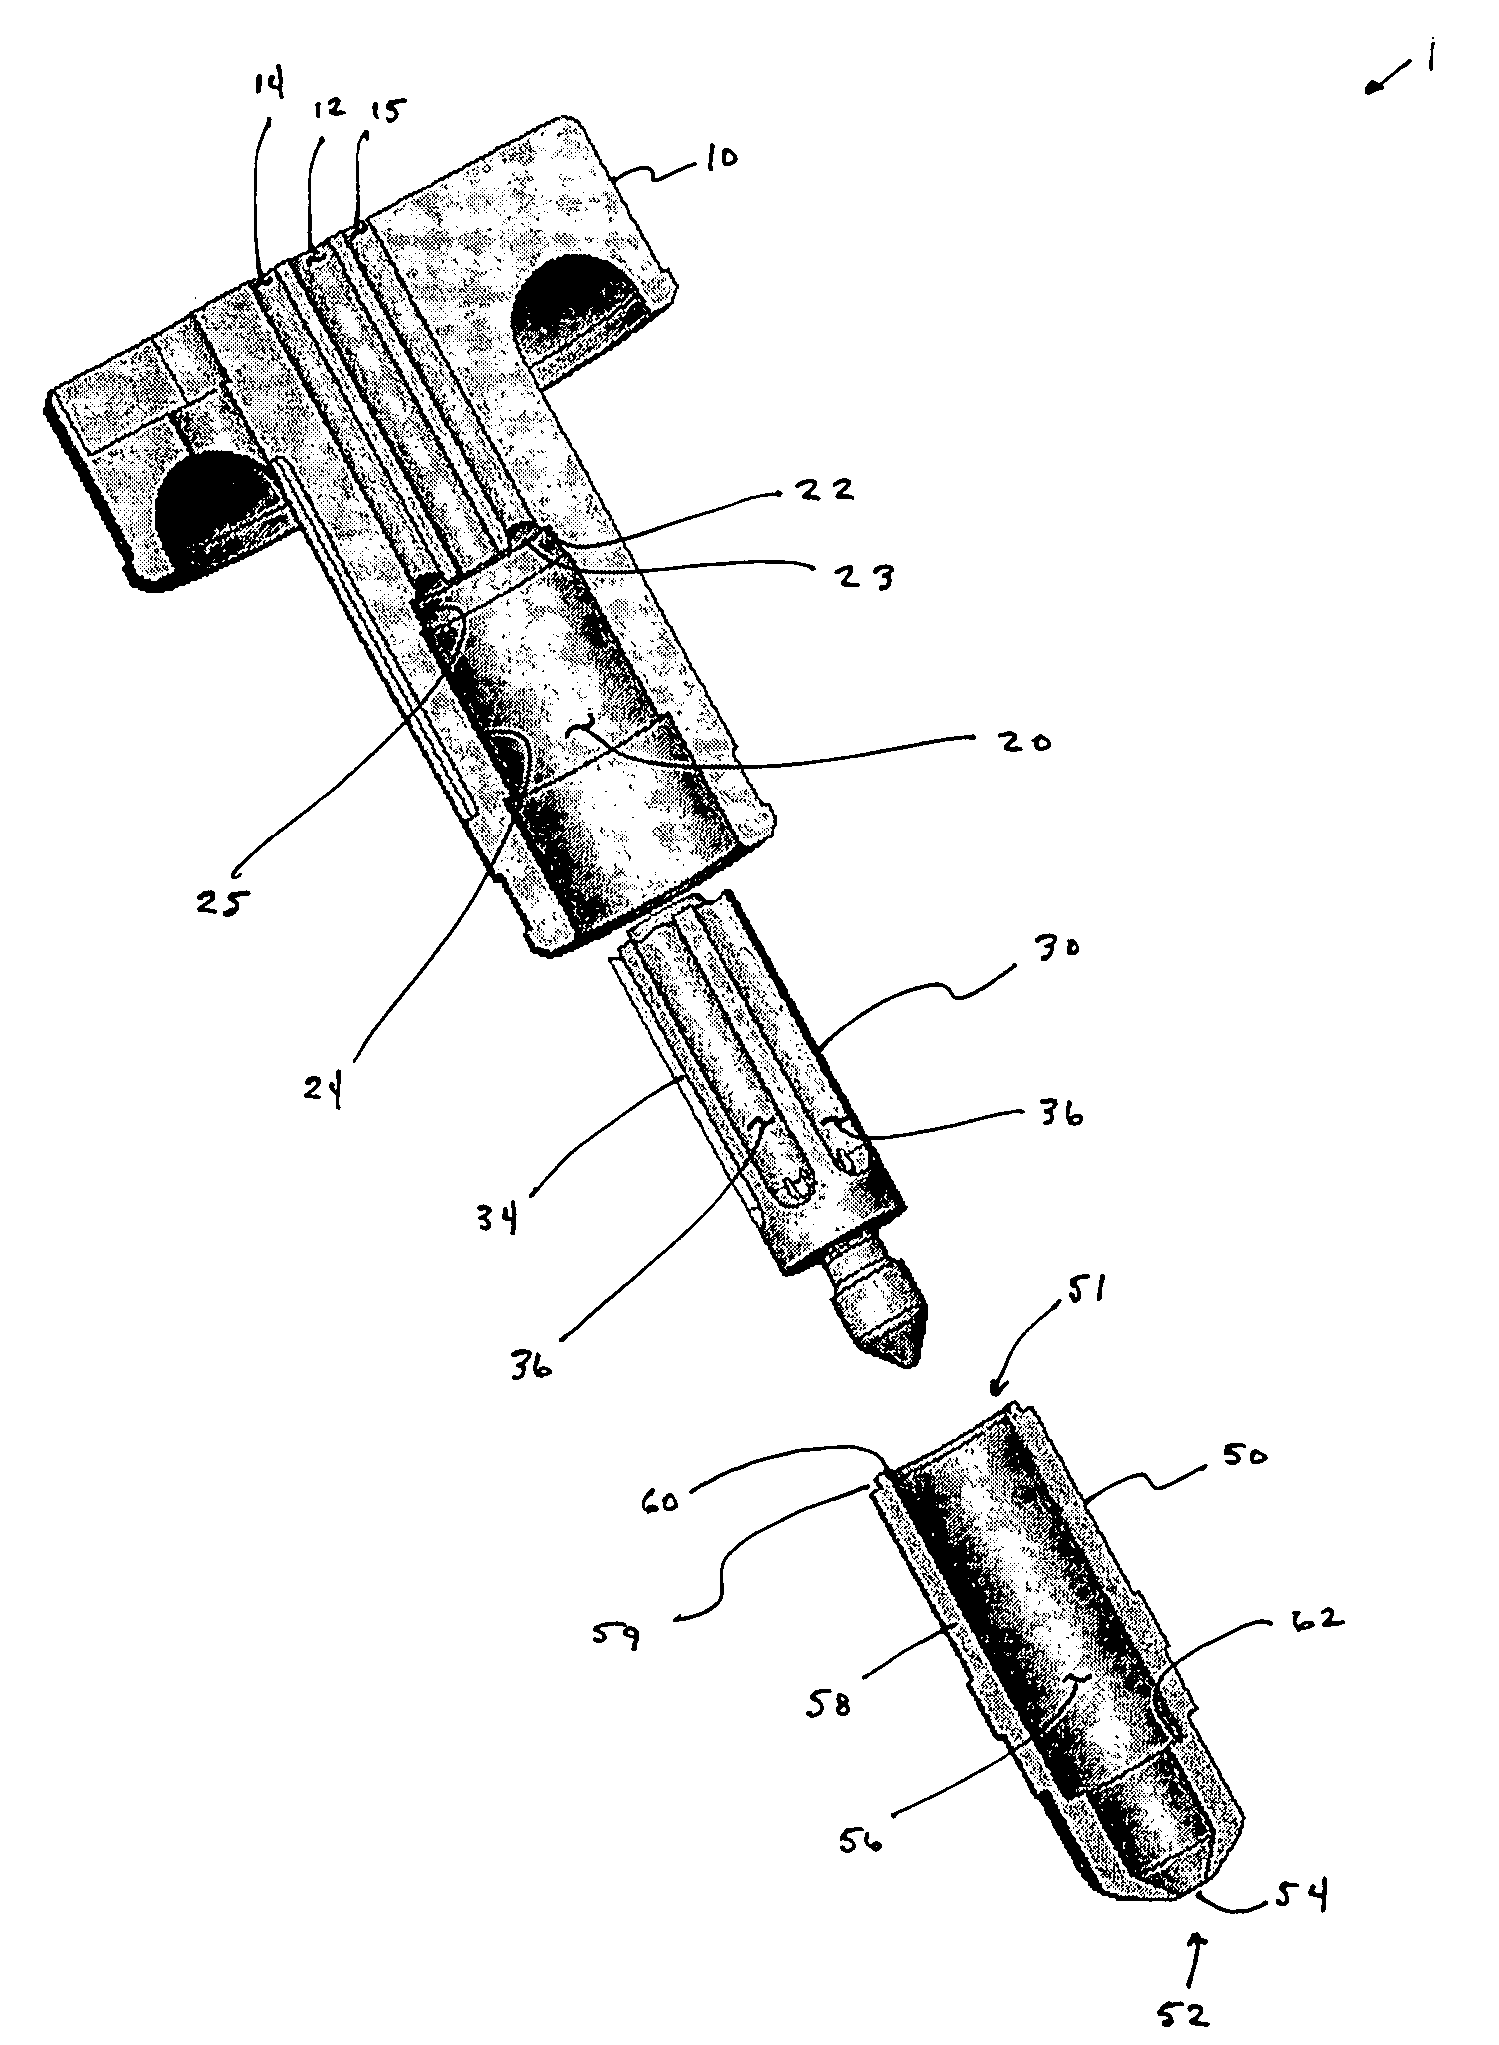 Co-injection nozzle